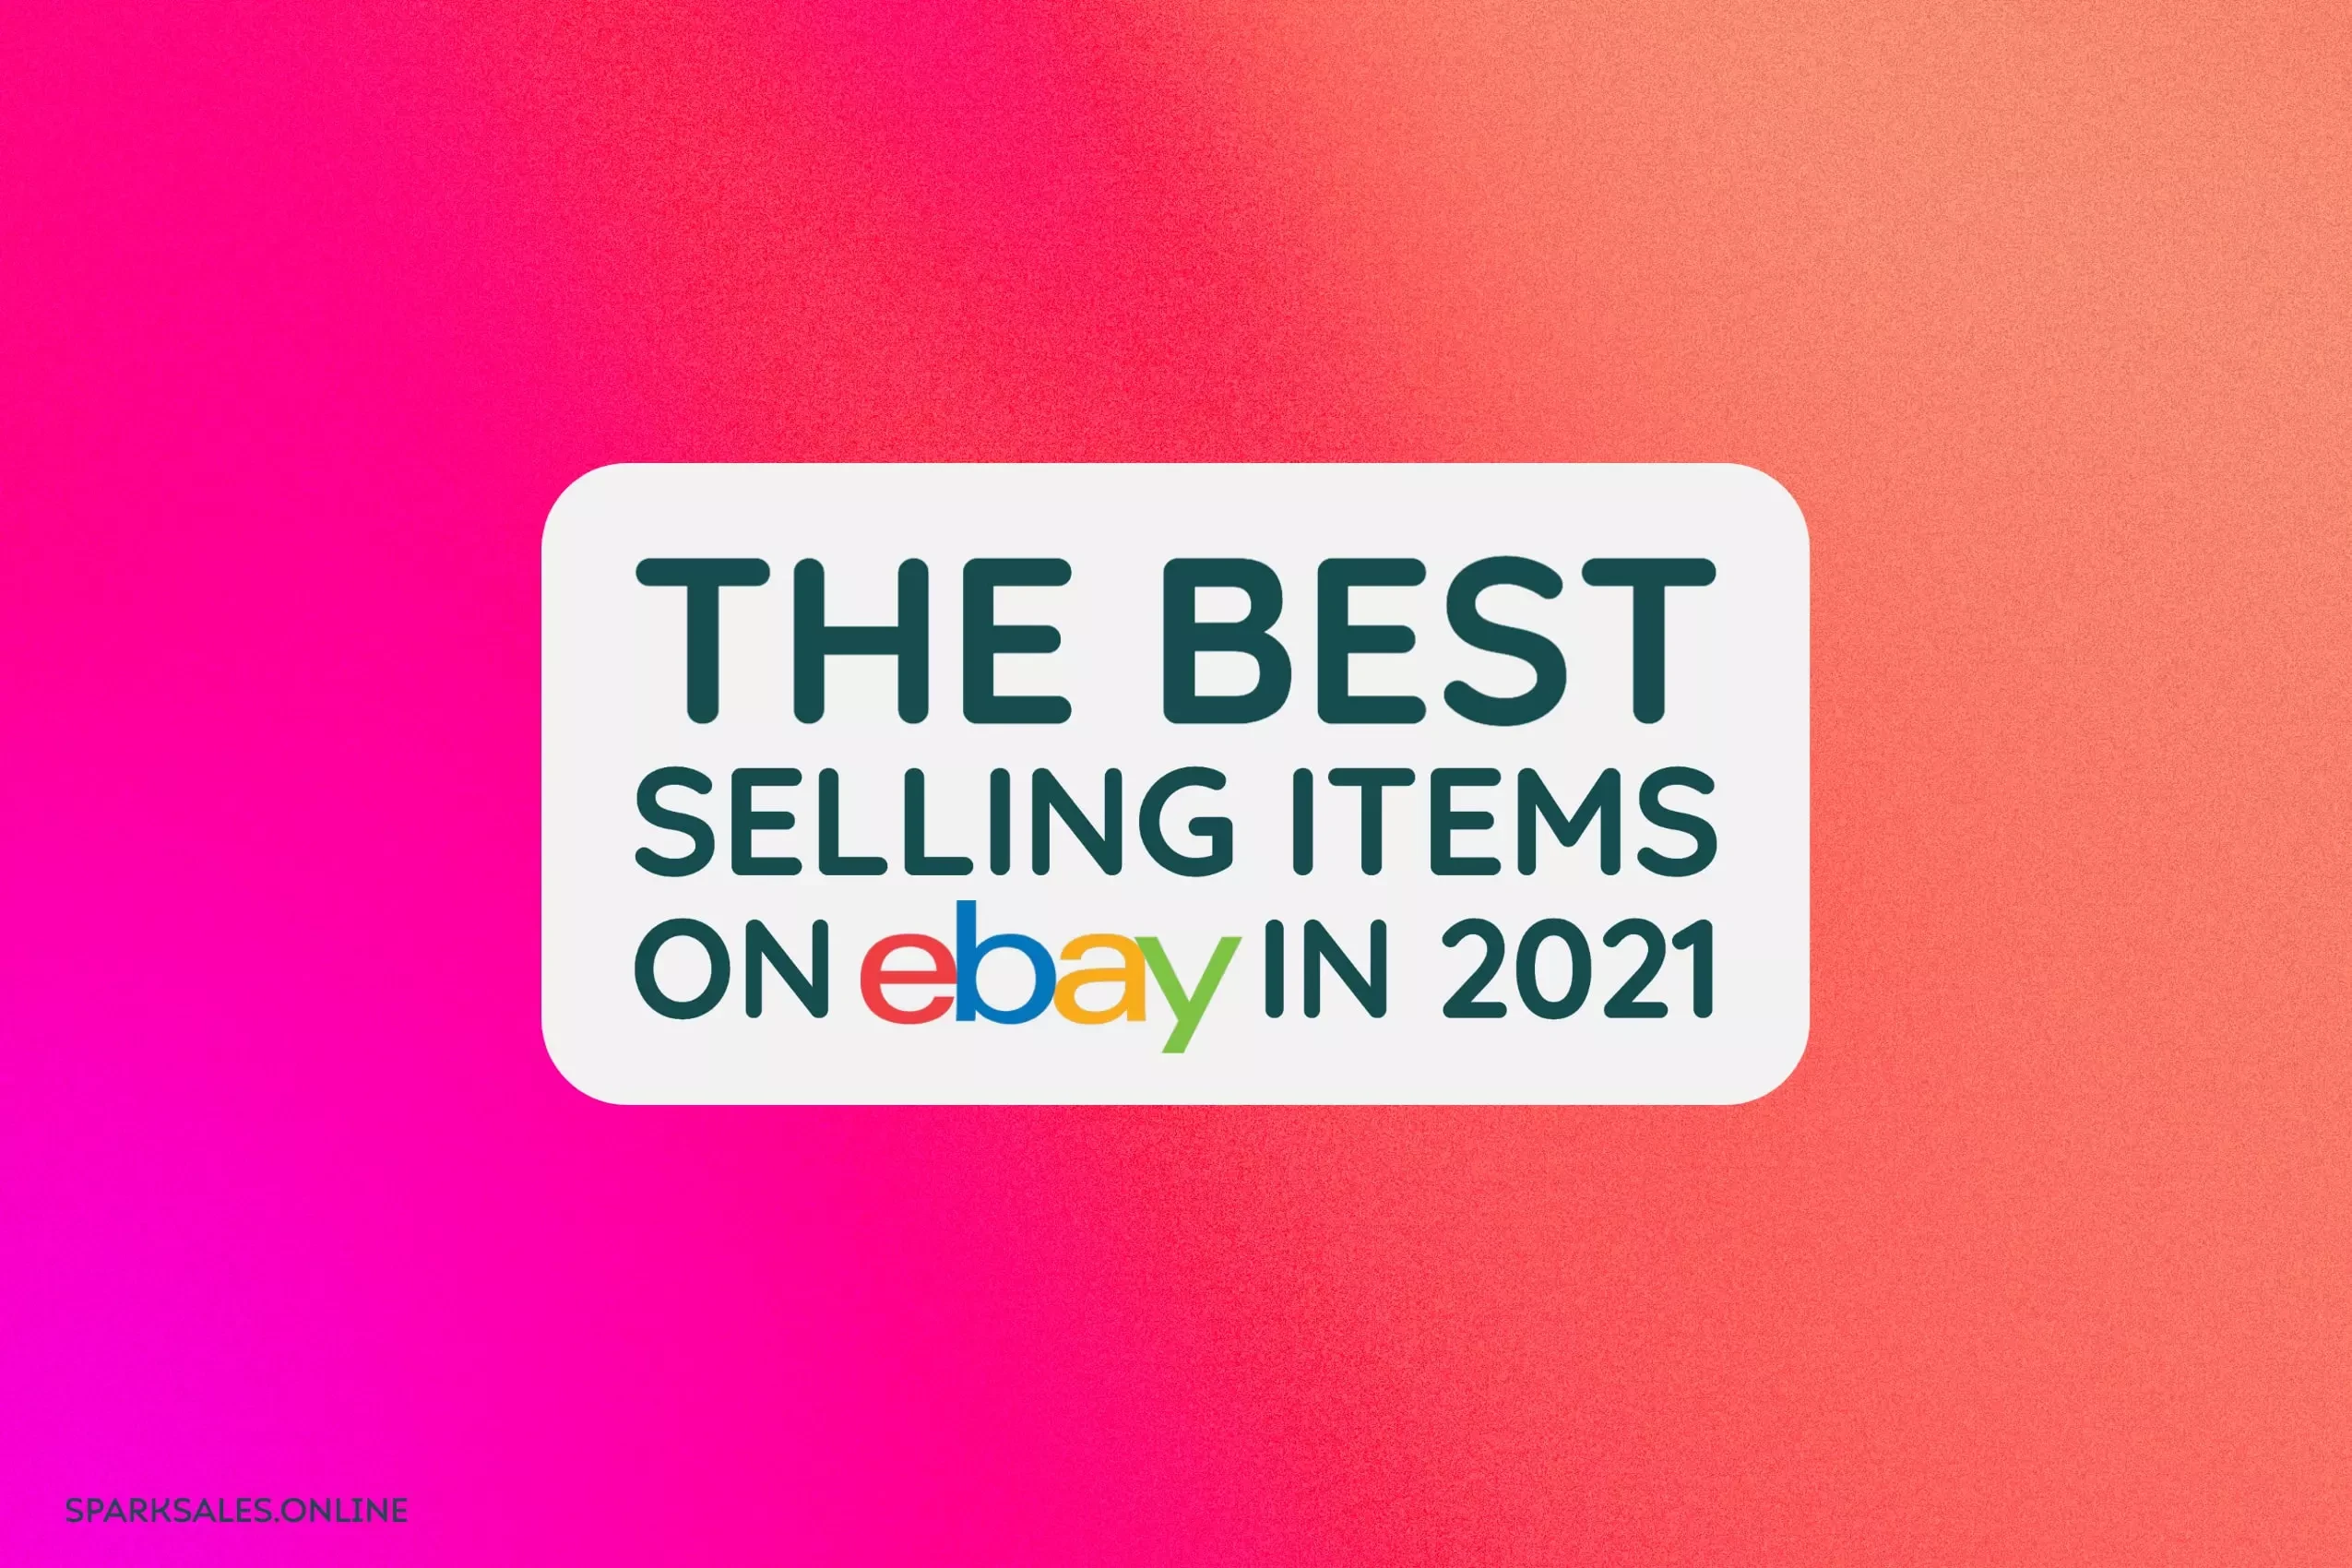 The Best-Selling Items on eBay